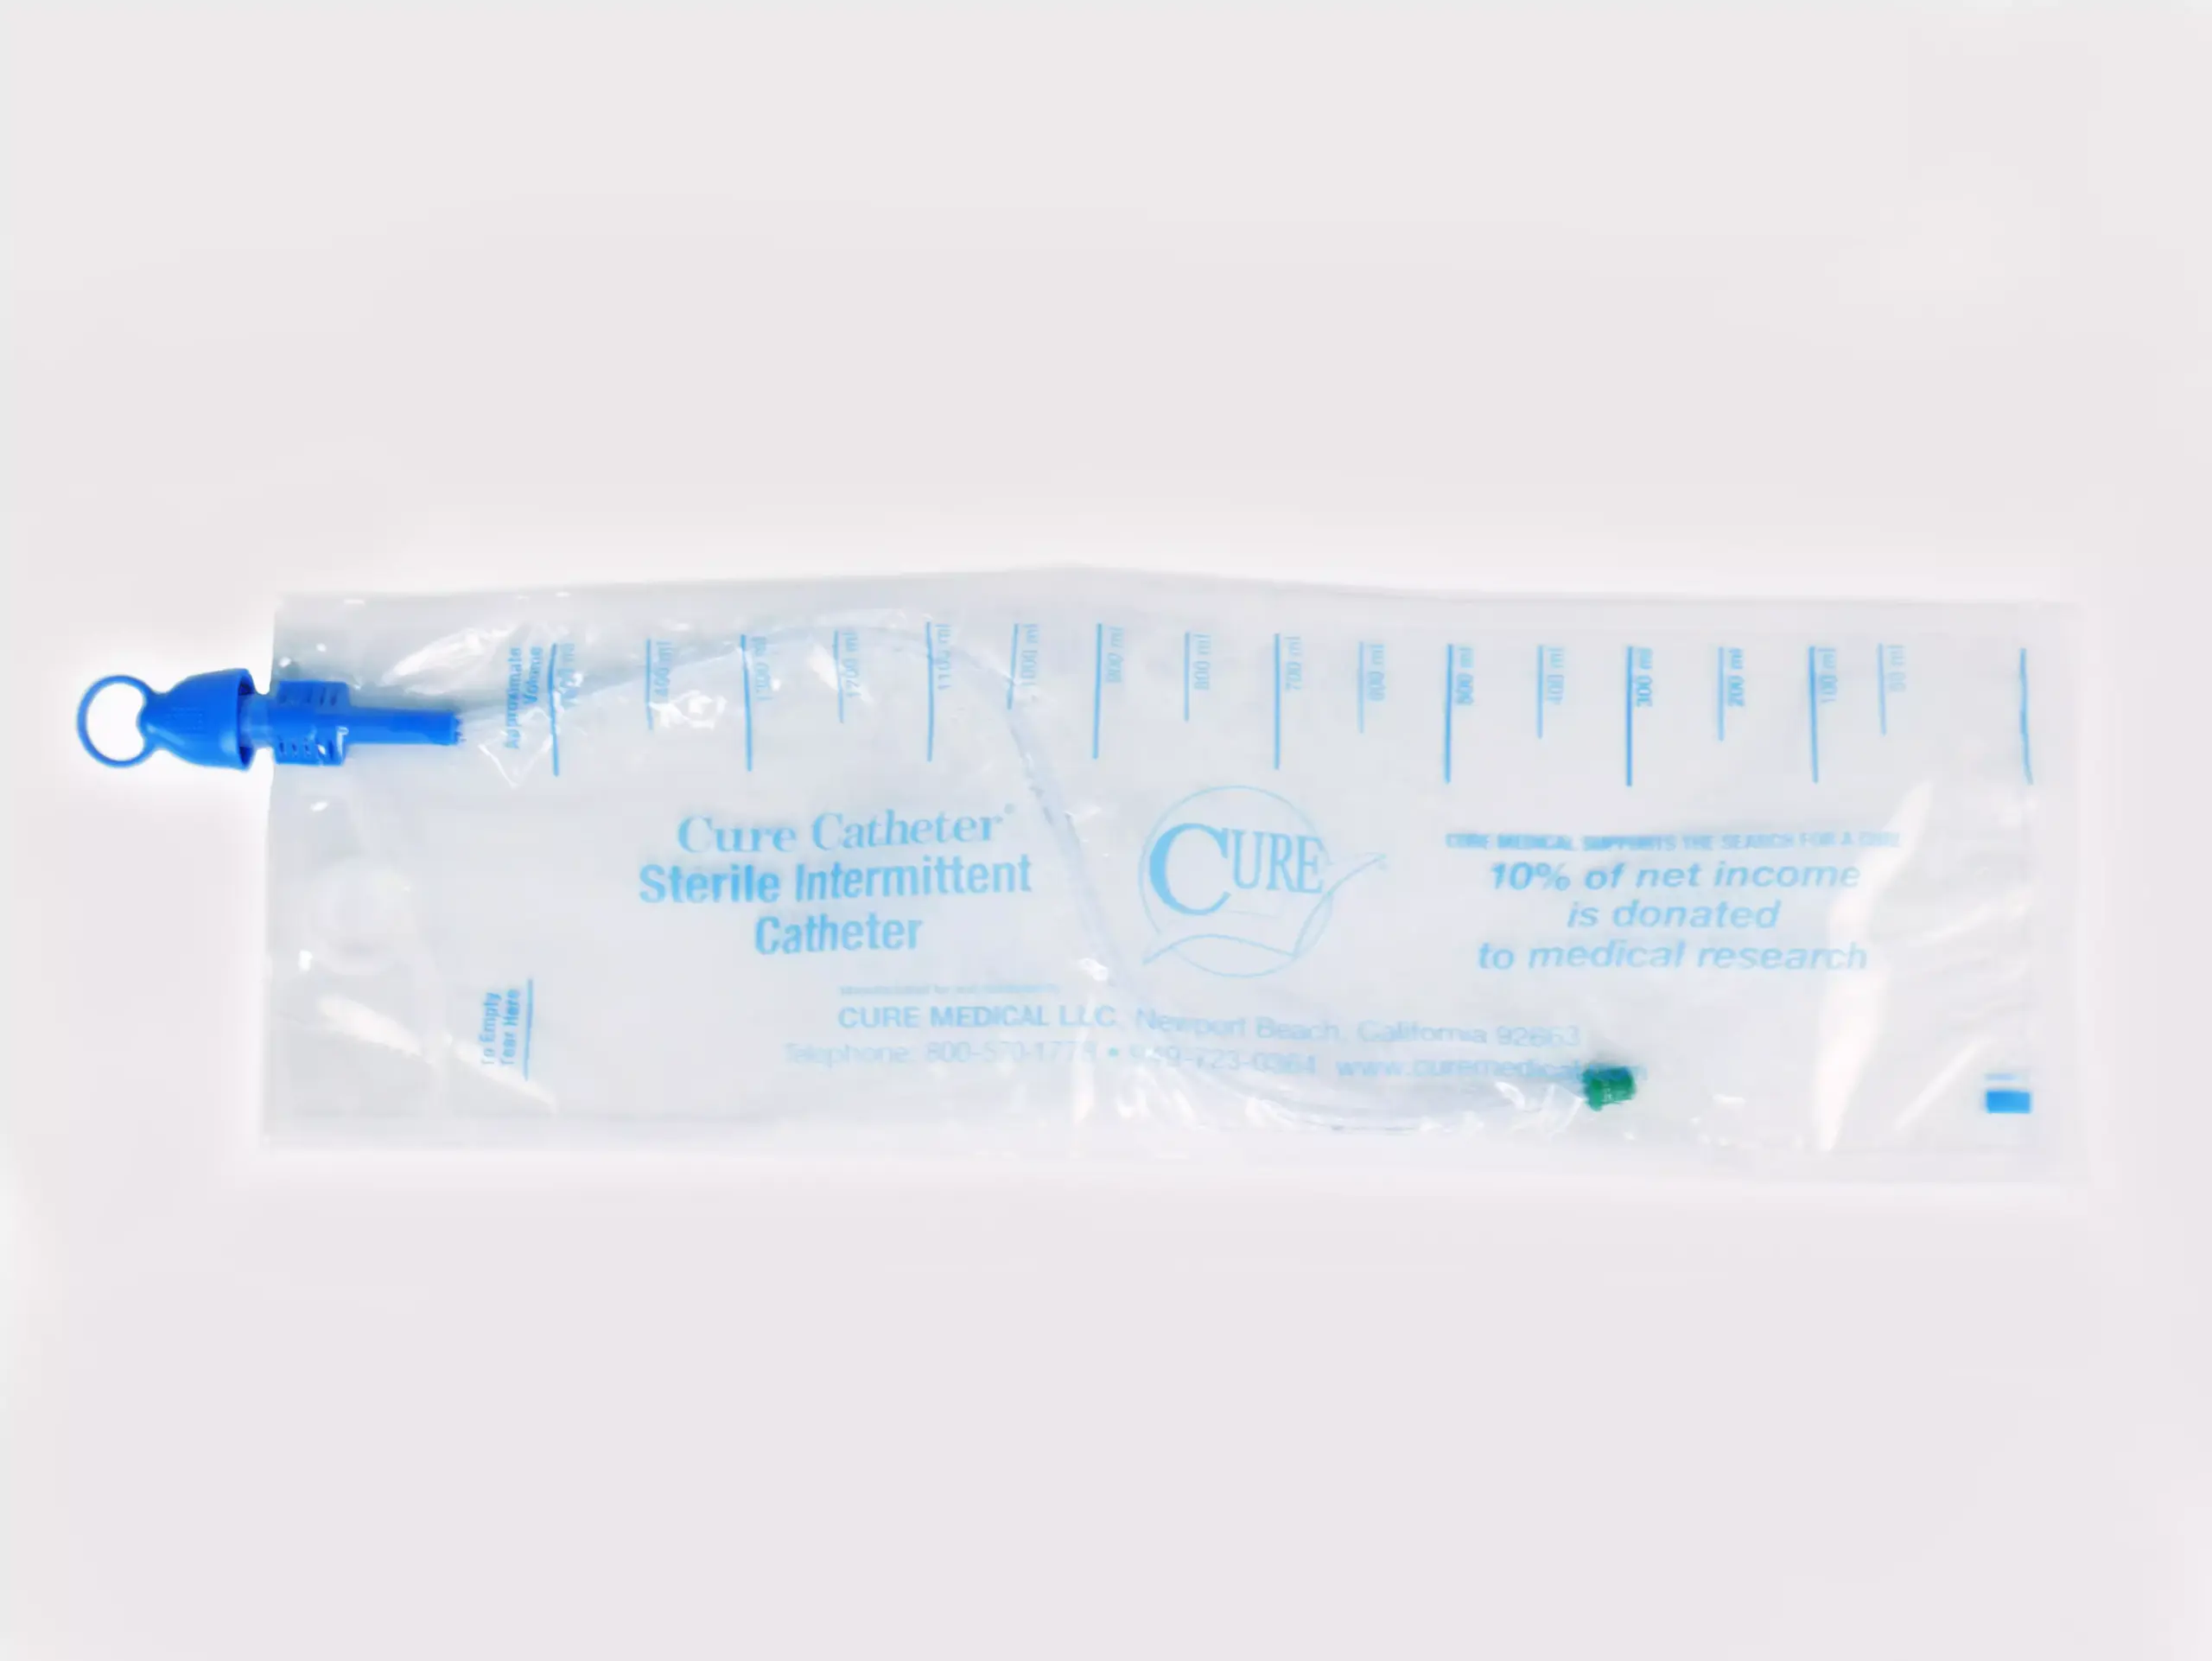 Close-up photograph of one of RA Fischer Co.'s Cure Catheters, blue on clear bag. Bag reads "Cure Catheter. Sterile Intermittent Catheter. Cure. 10% of net income is donated to medical research."